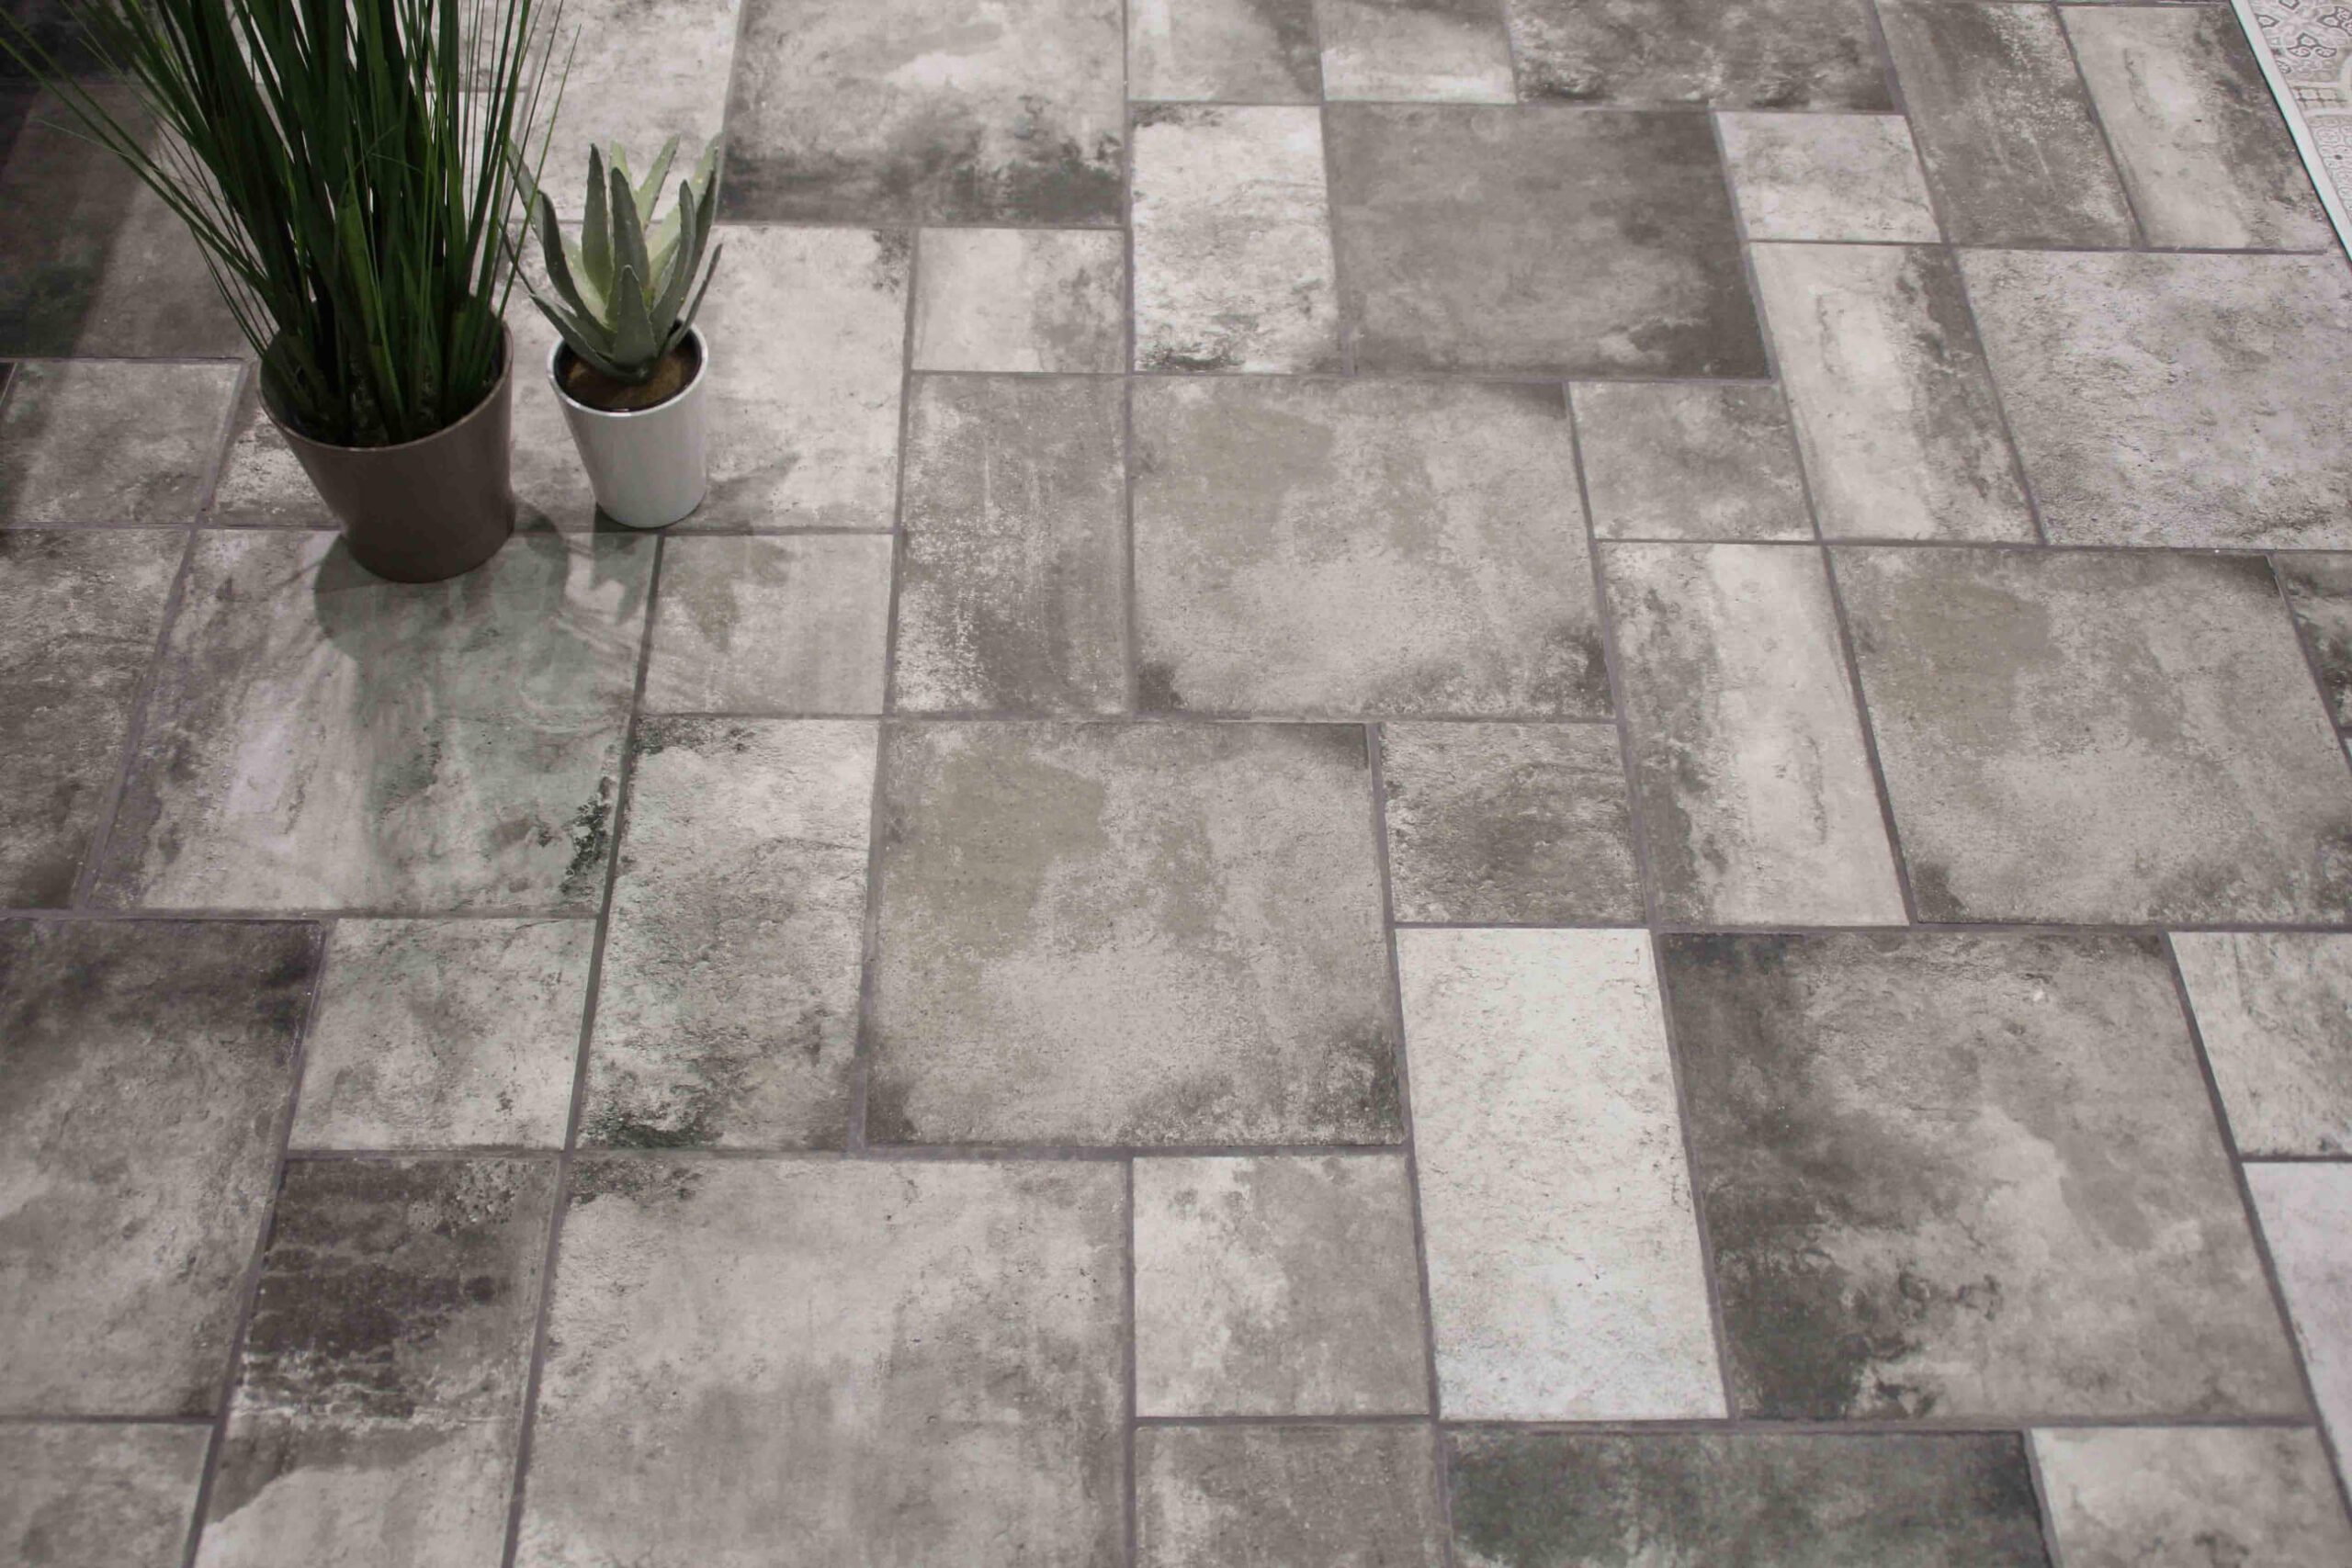 Which Colour Vitrified Tiles are the Best?